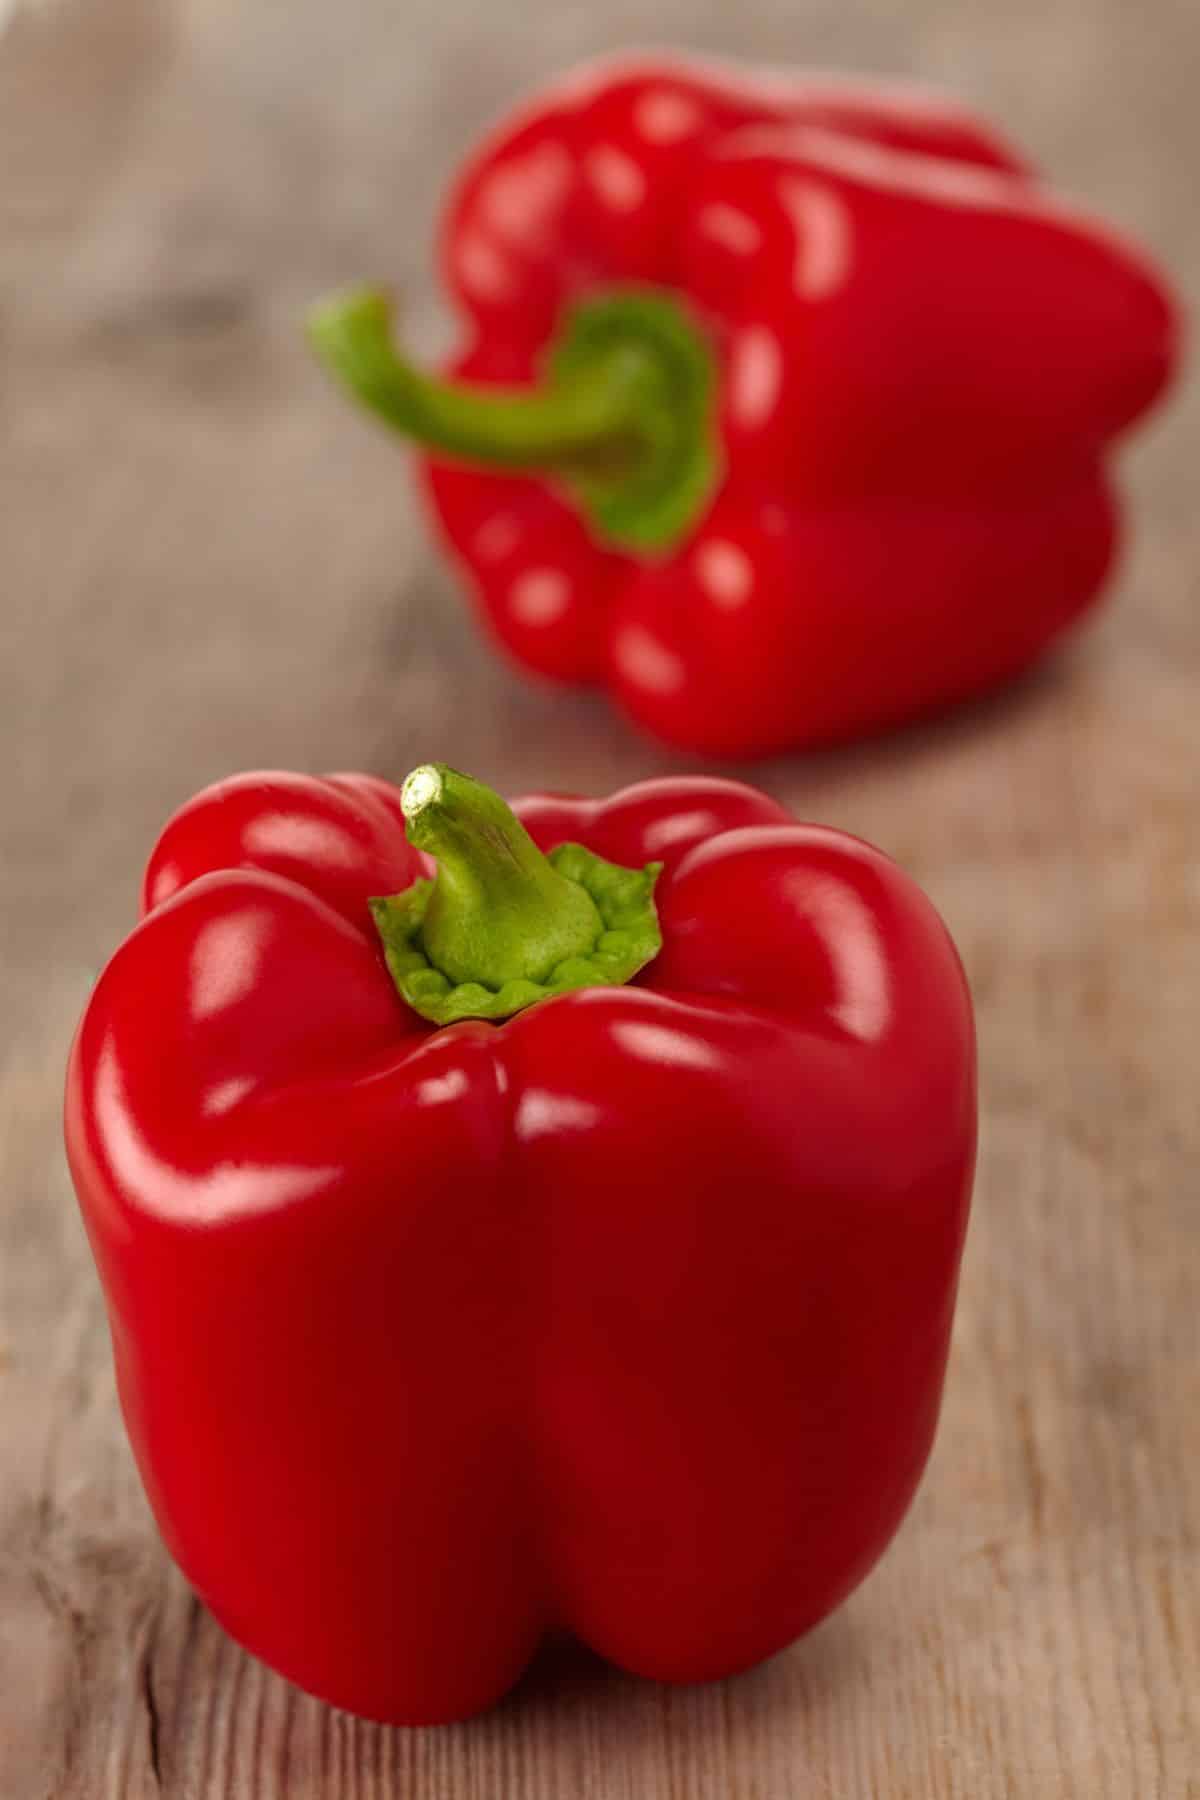 Red bell peppers on wooden surface.